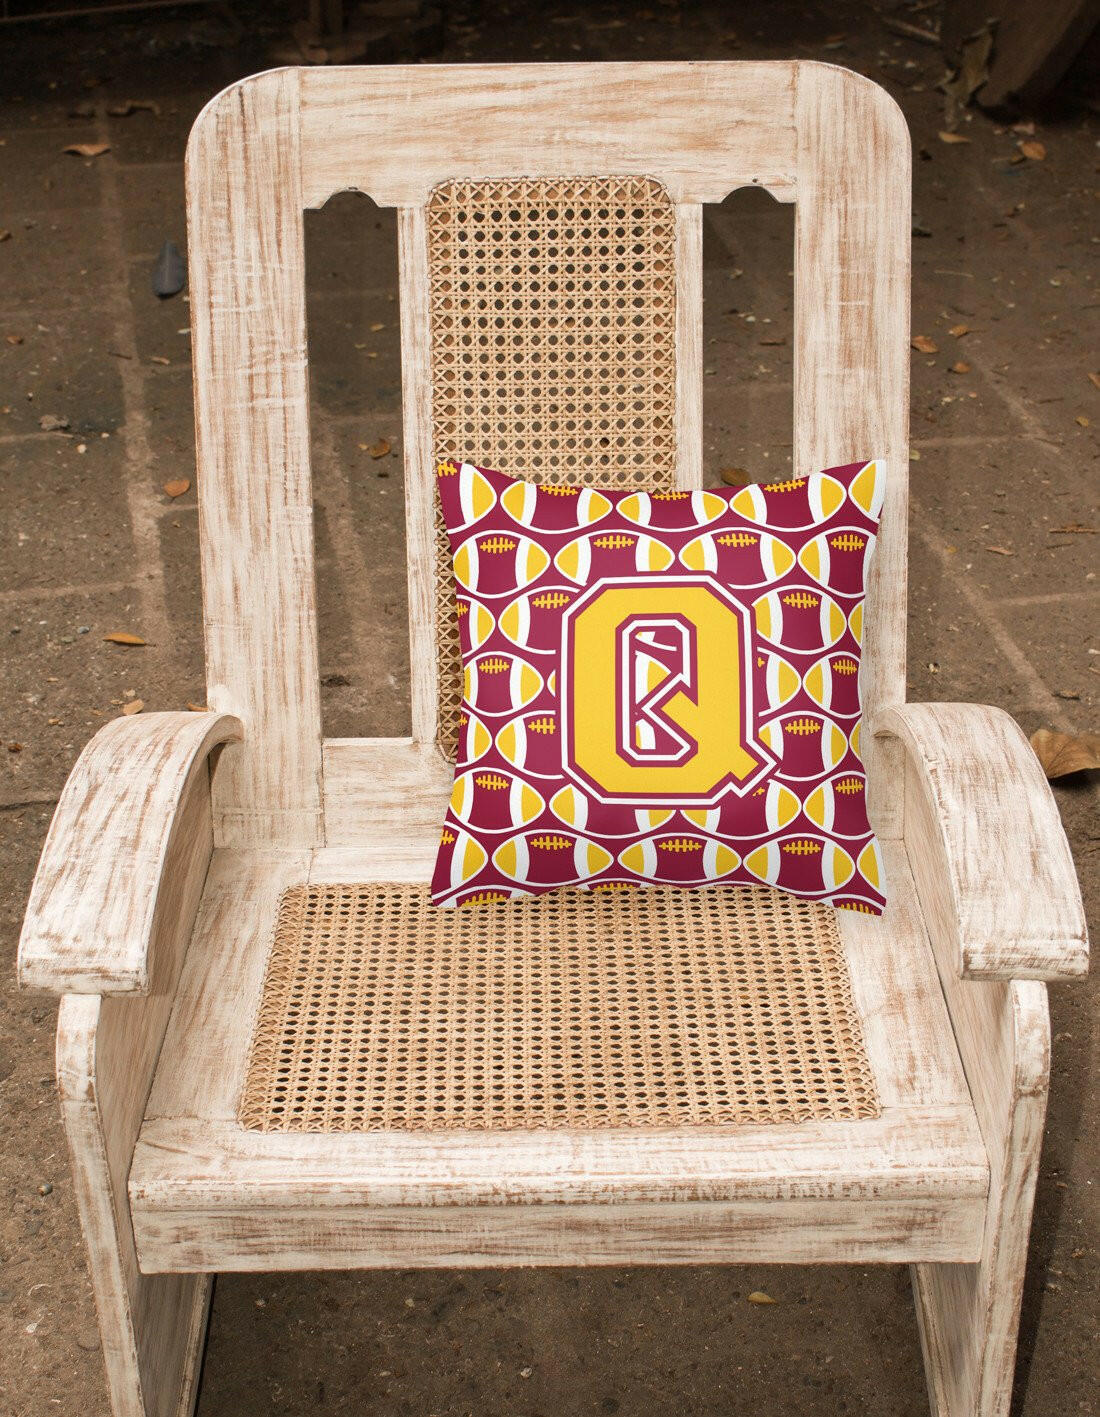 Letter Q Football Maroon and Gold Fabric Decorative Pillow CJ1081-QPW1414 by Caroline's Treasures